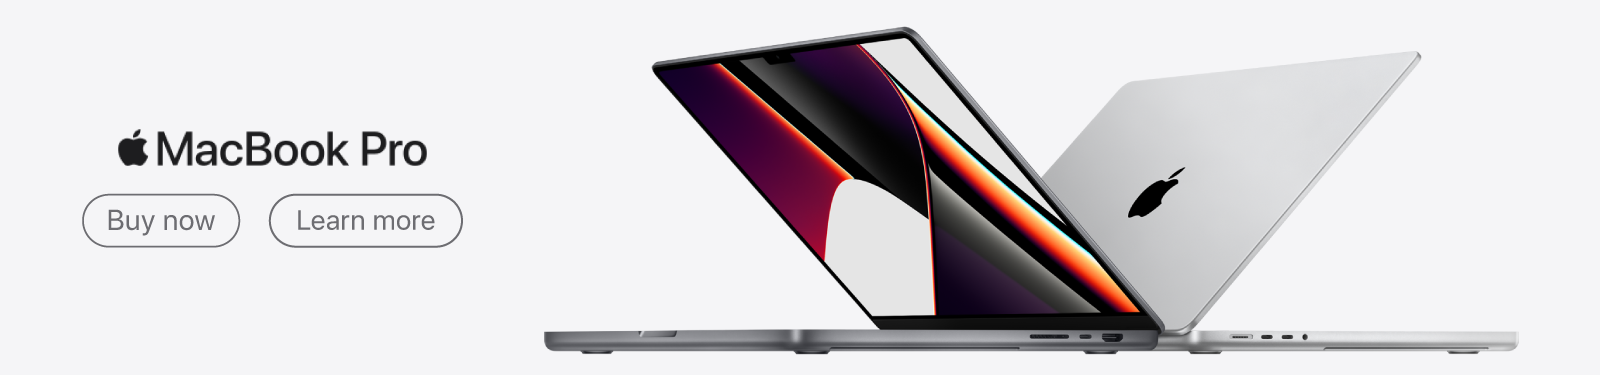 MacBook Pro Now Available